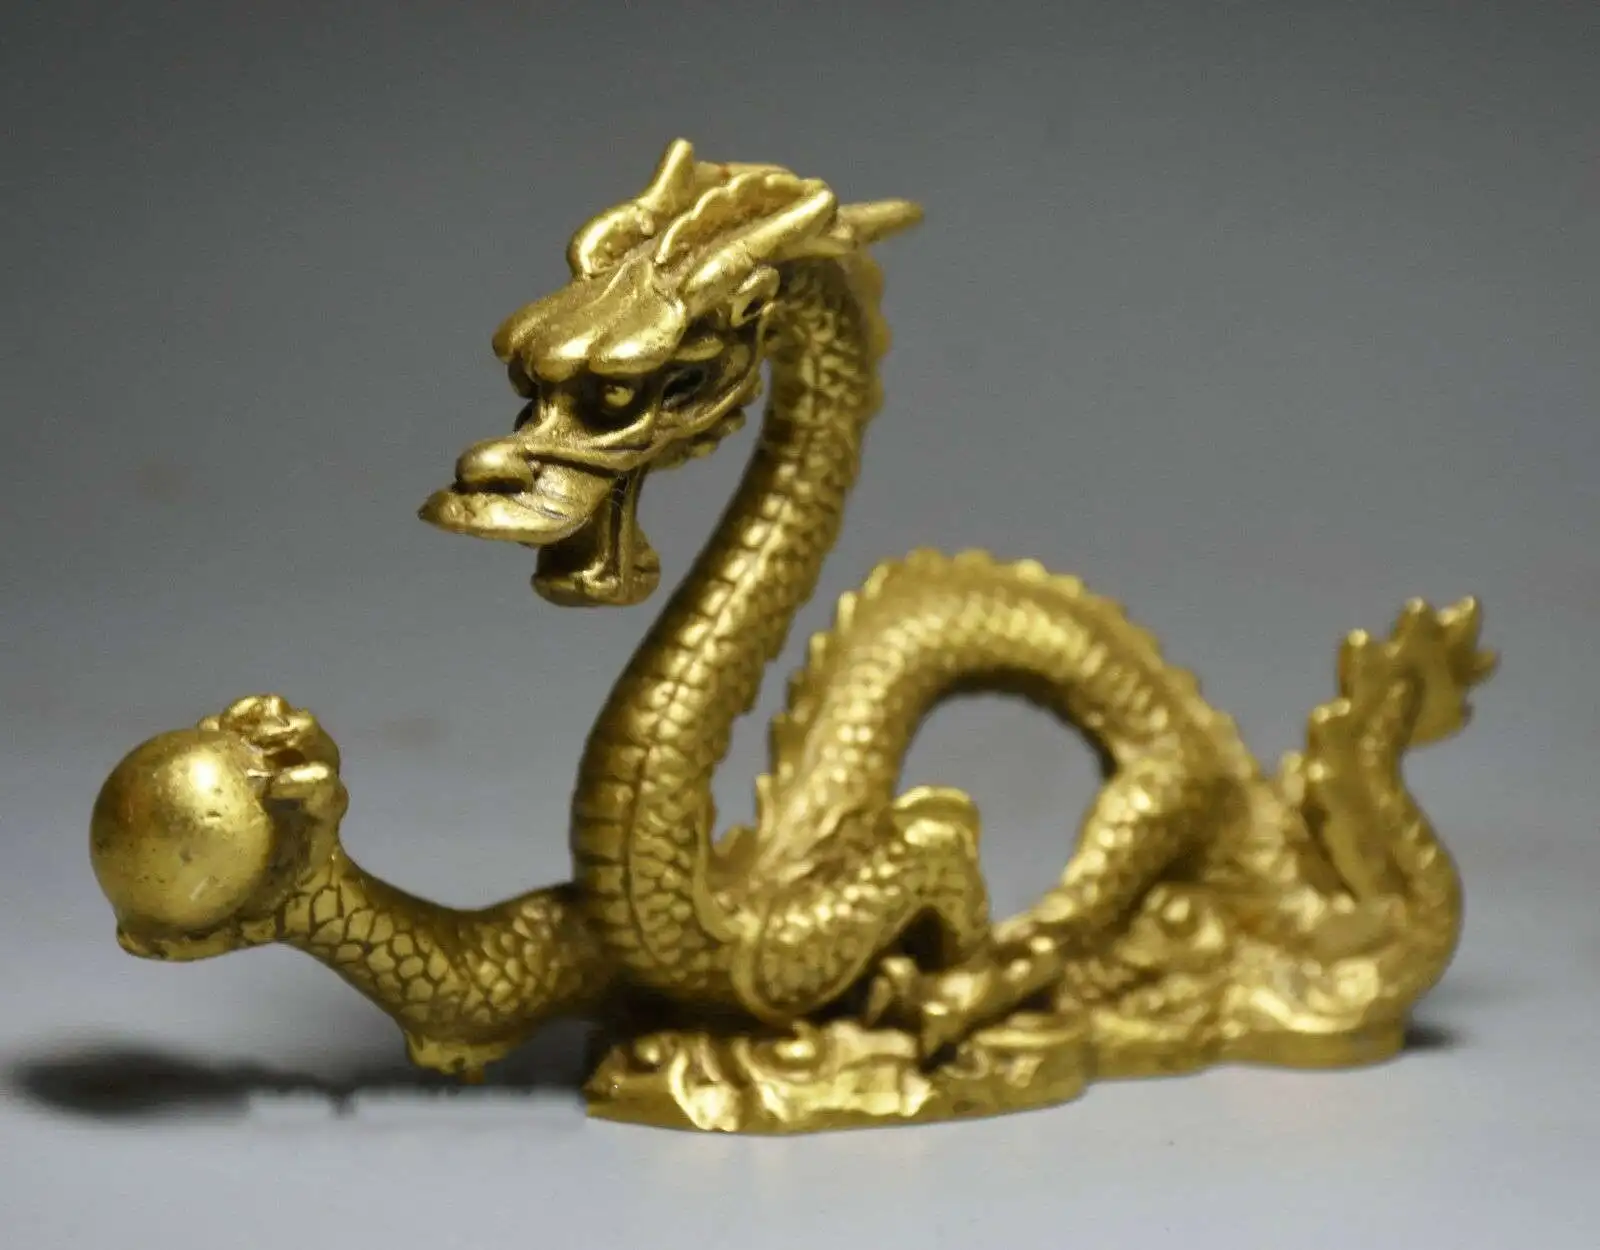 

Chinese Folk Feng Shui Pure Copper Brass Zodiac Year Dragon Statue Statues for Decoration Home Accessories Collection Ornaments